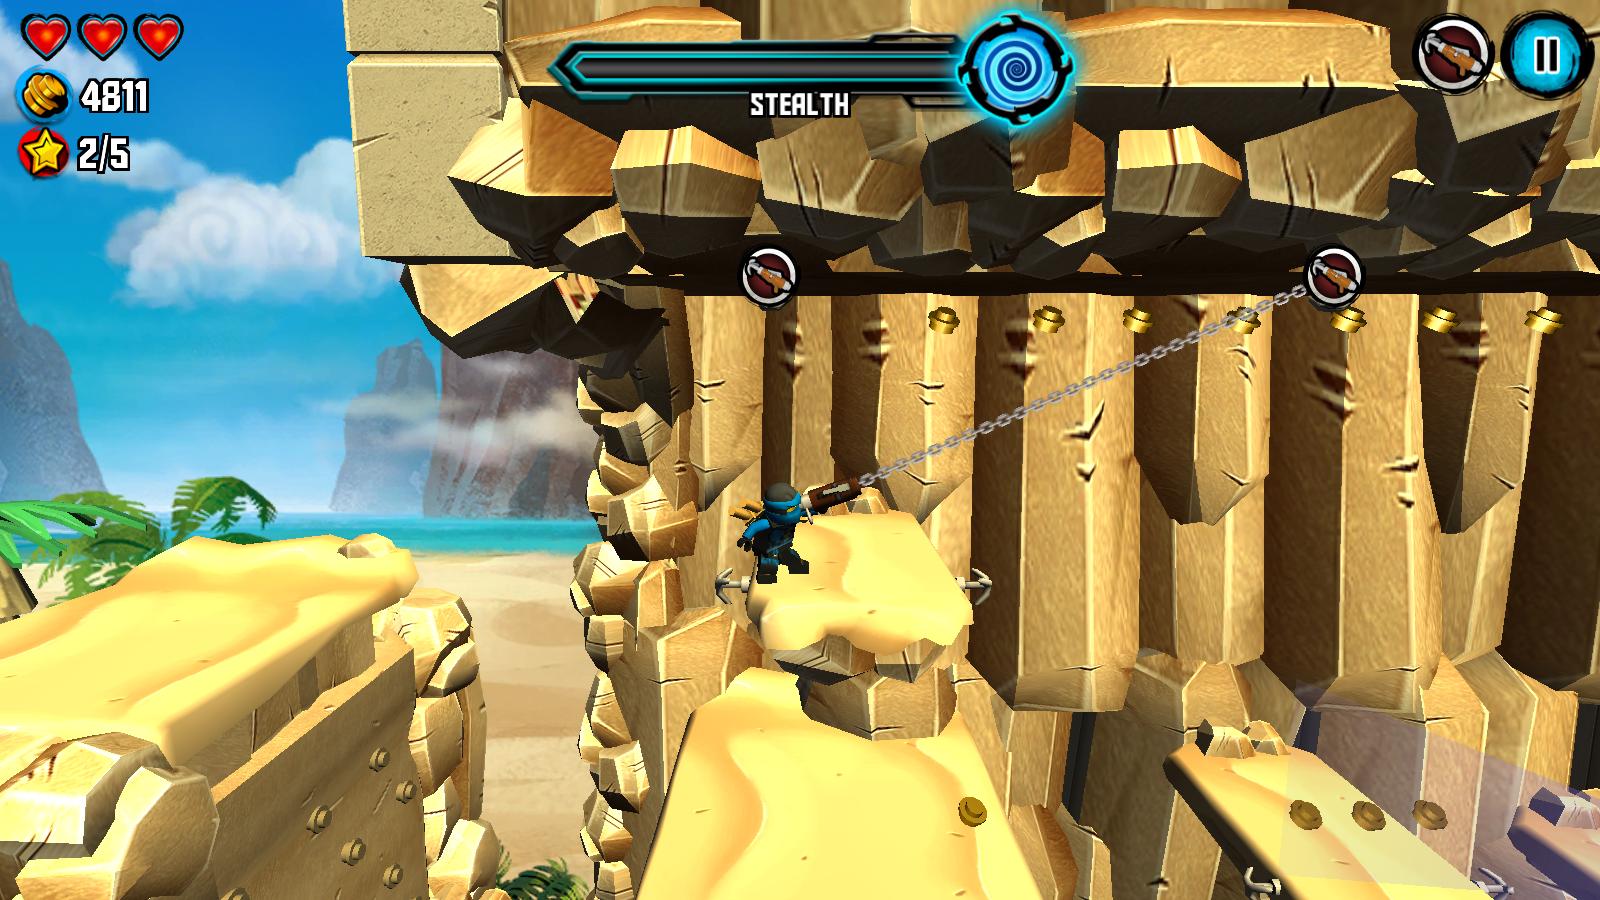 LEGO® Ninjago™: Skybound for Android - APK Download